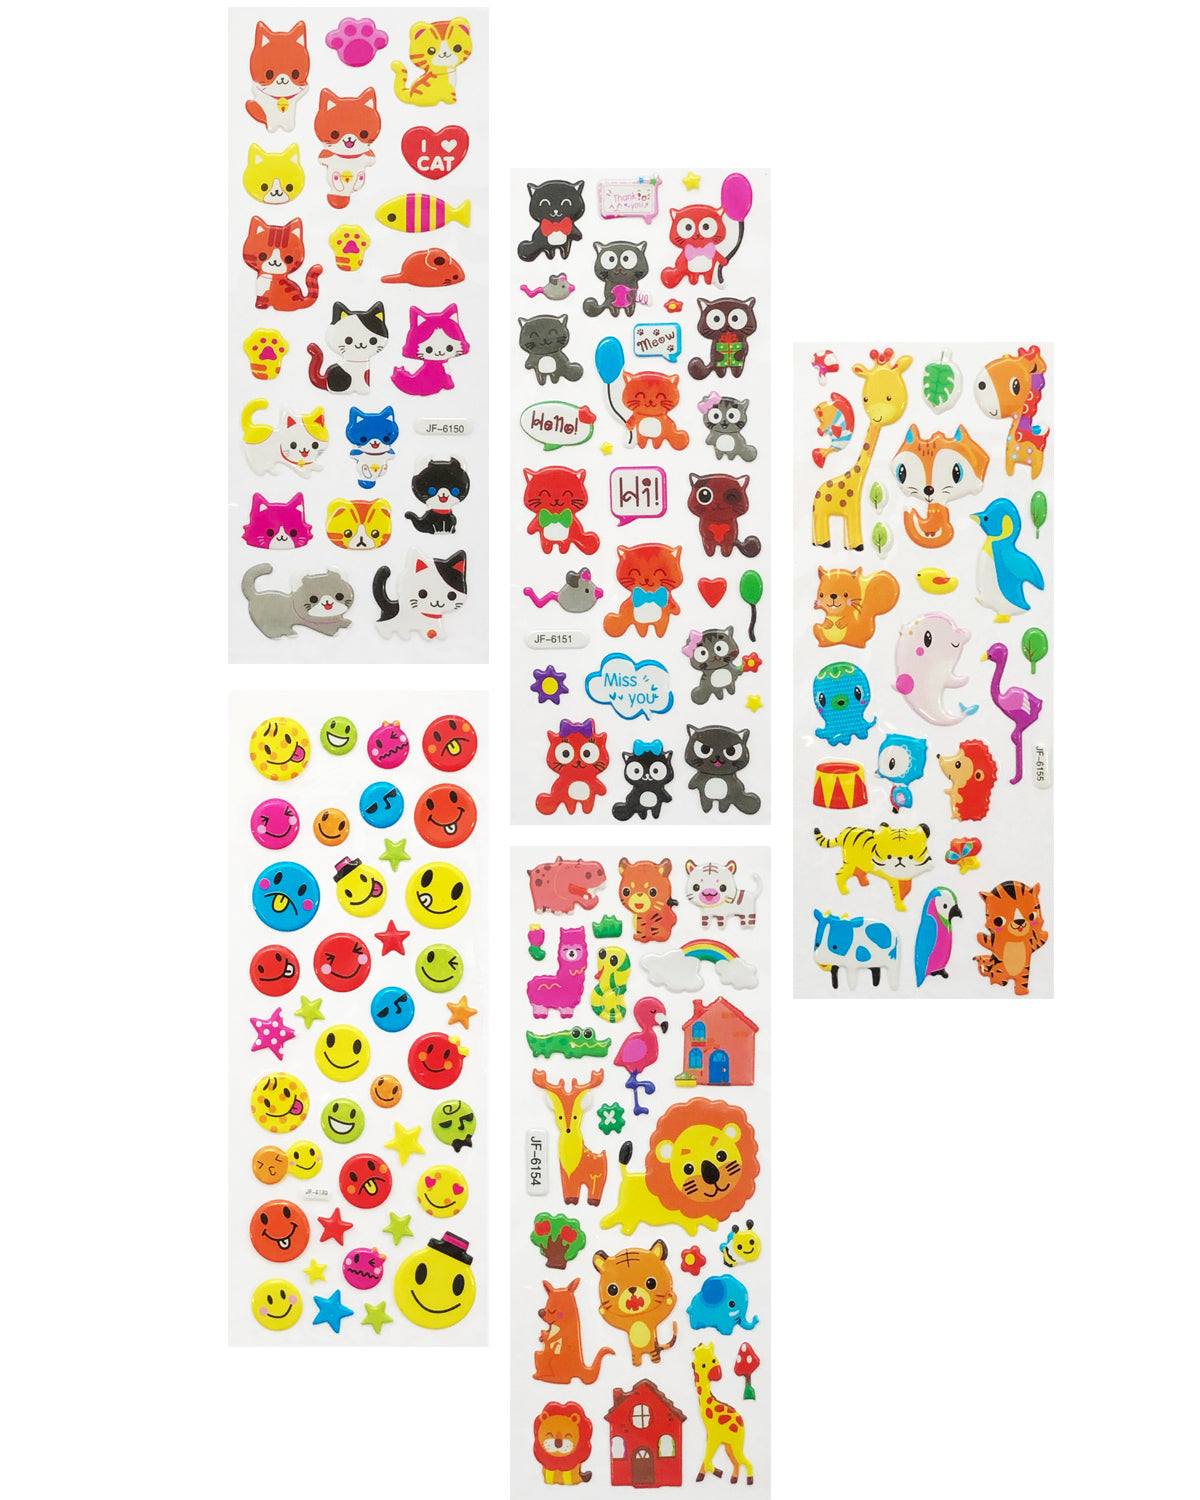 Reusable 3D Puffy Stickers: Custom Design Bulk Stickers for Kids and  Toddlers